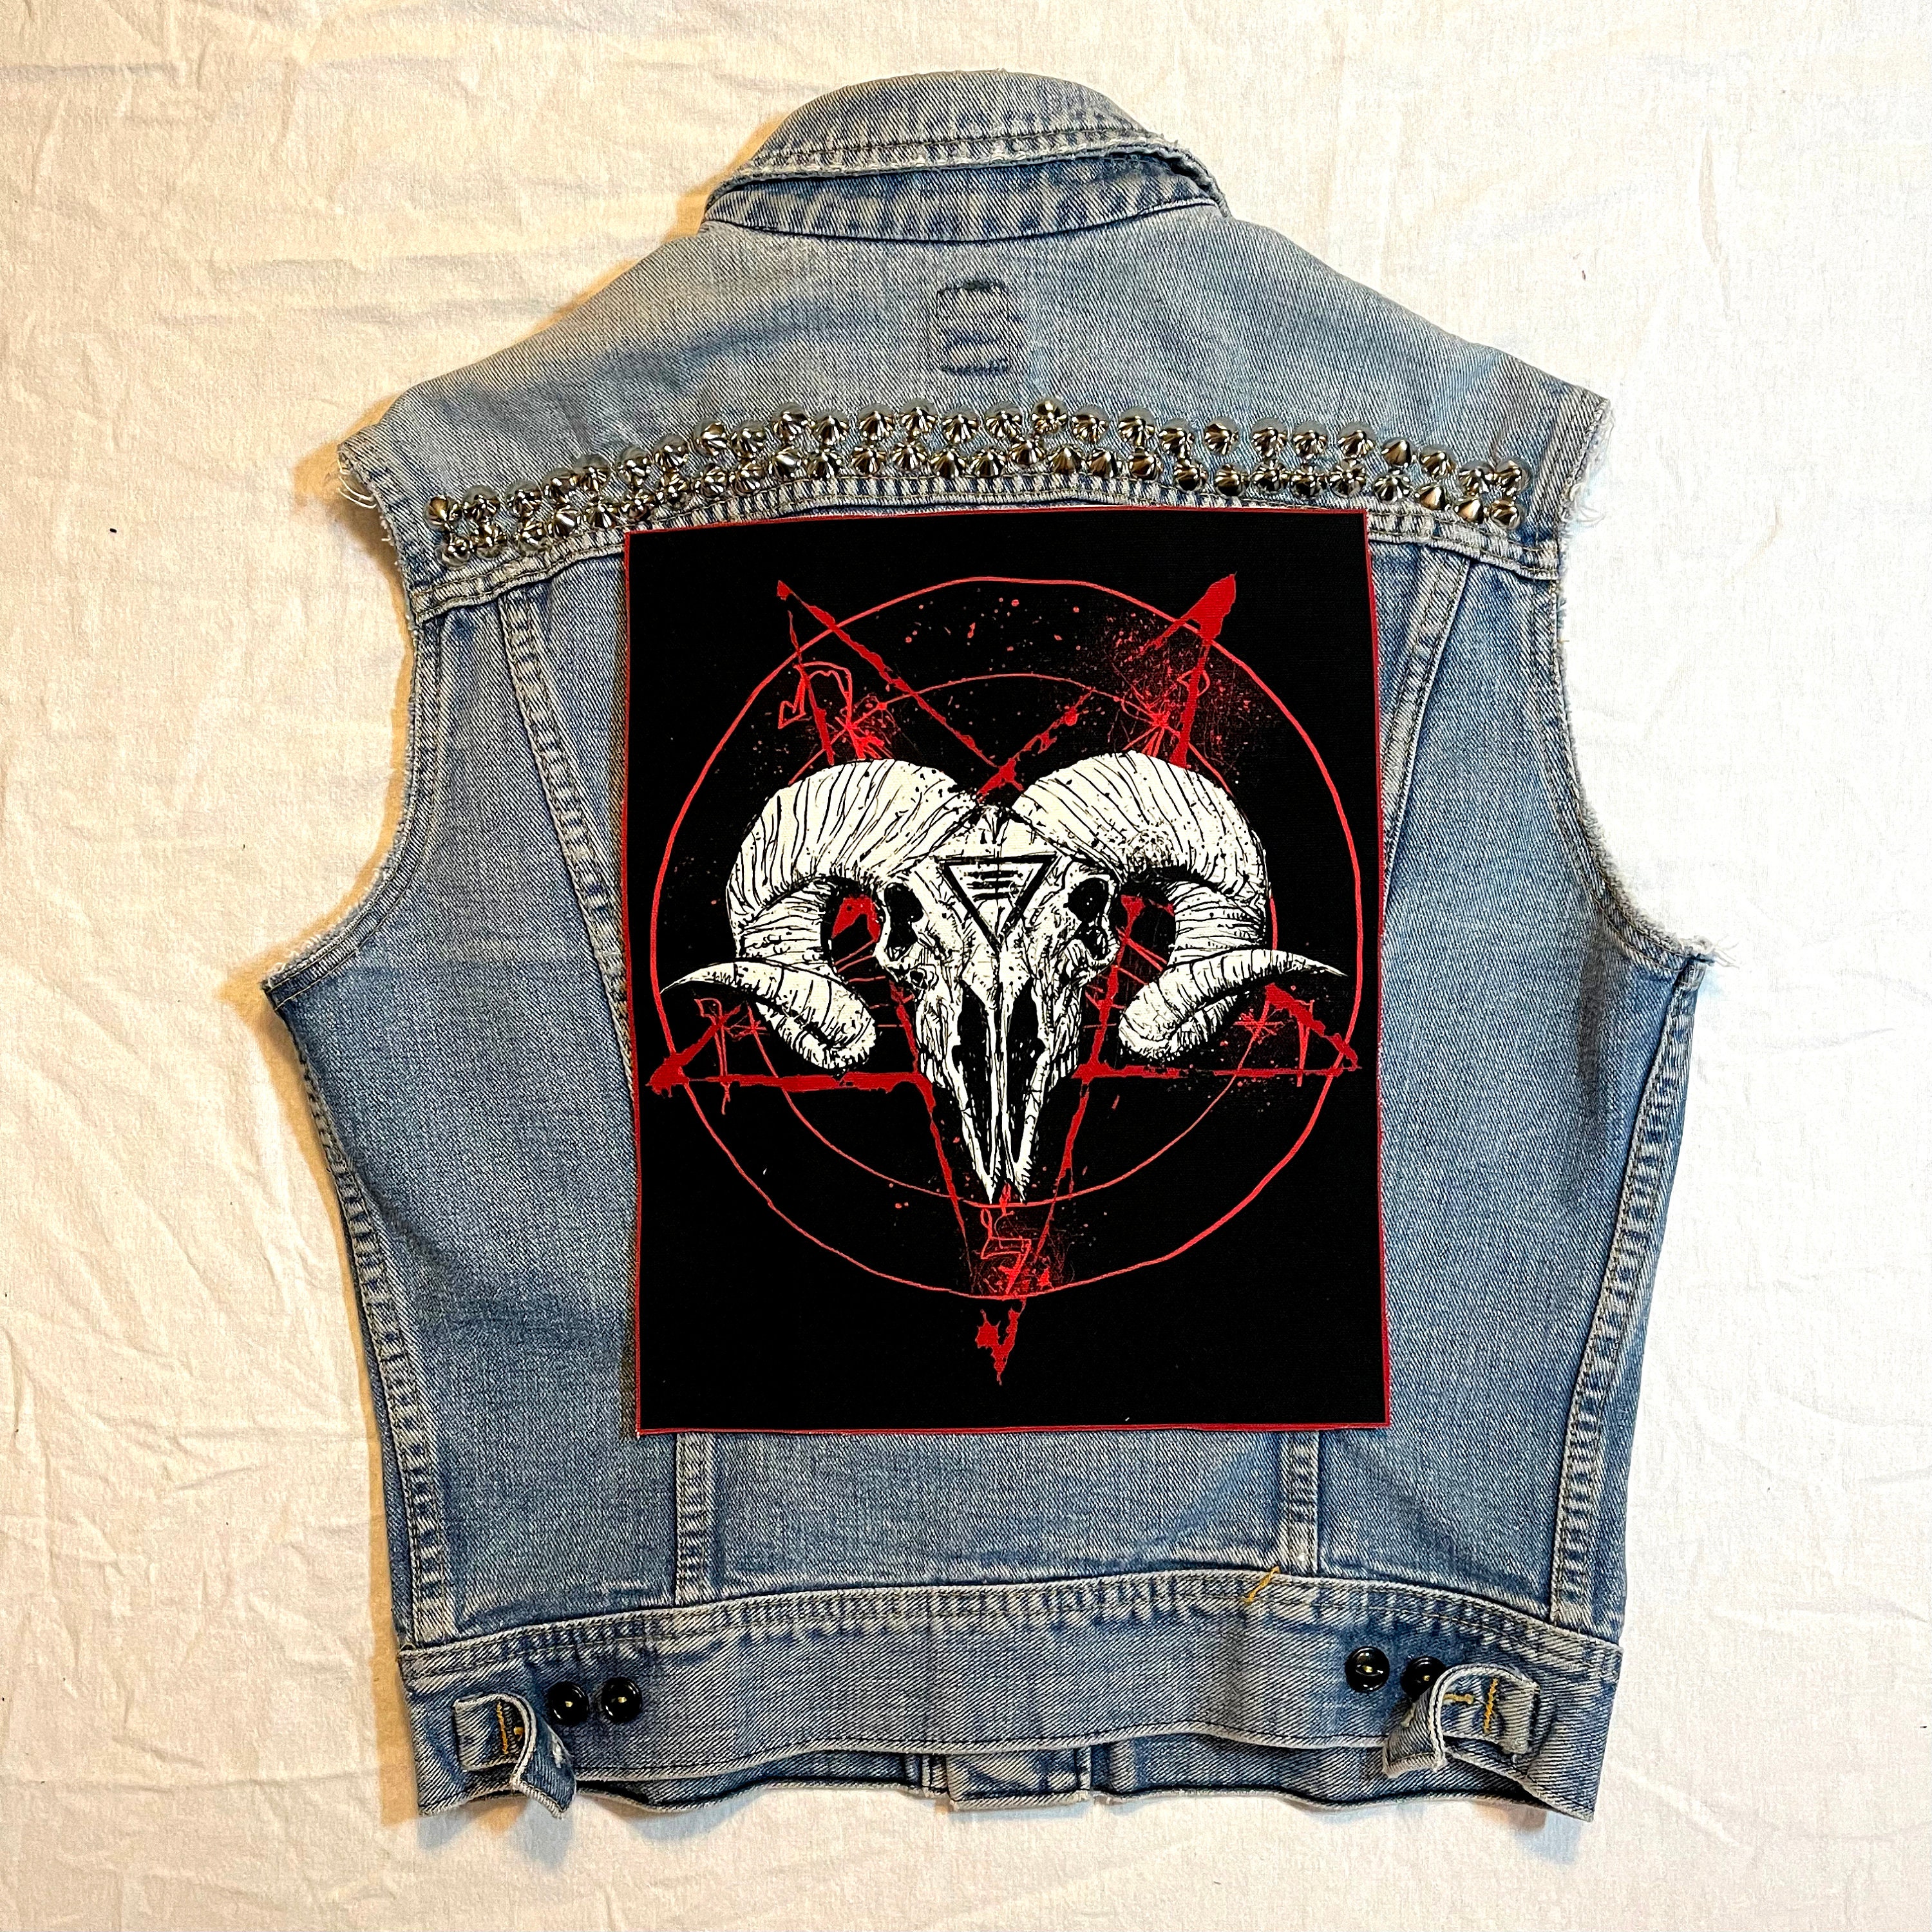 My minamalist pin back patch jackets. Ideally only want to fill it up with  bands I've seen live but some GOAT bands are too good not to wear :  r/BattleJackets